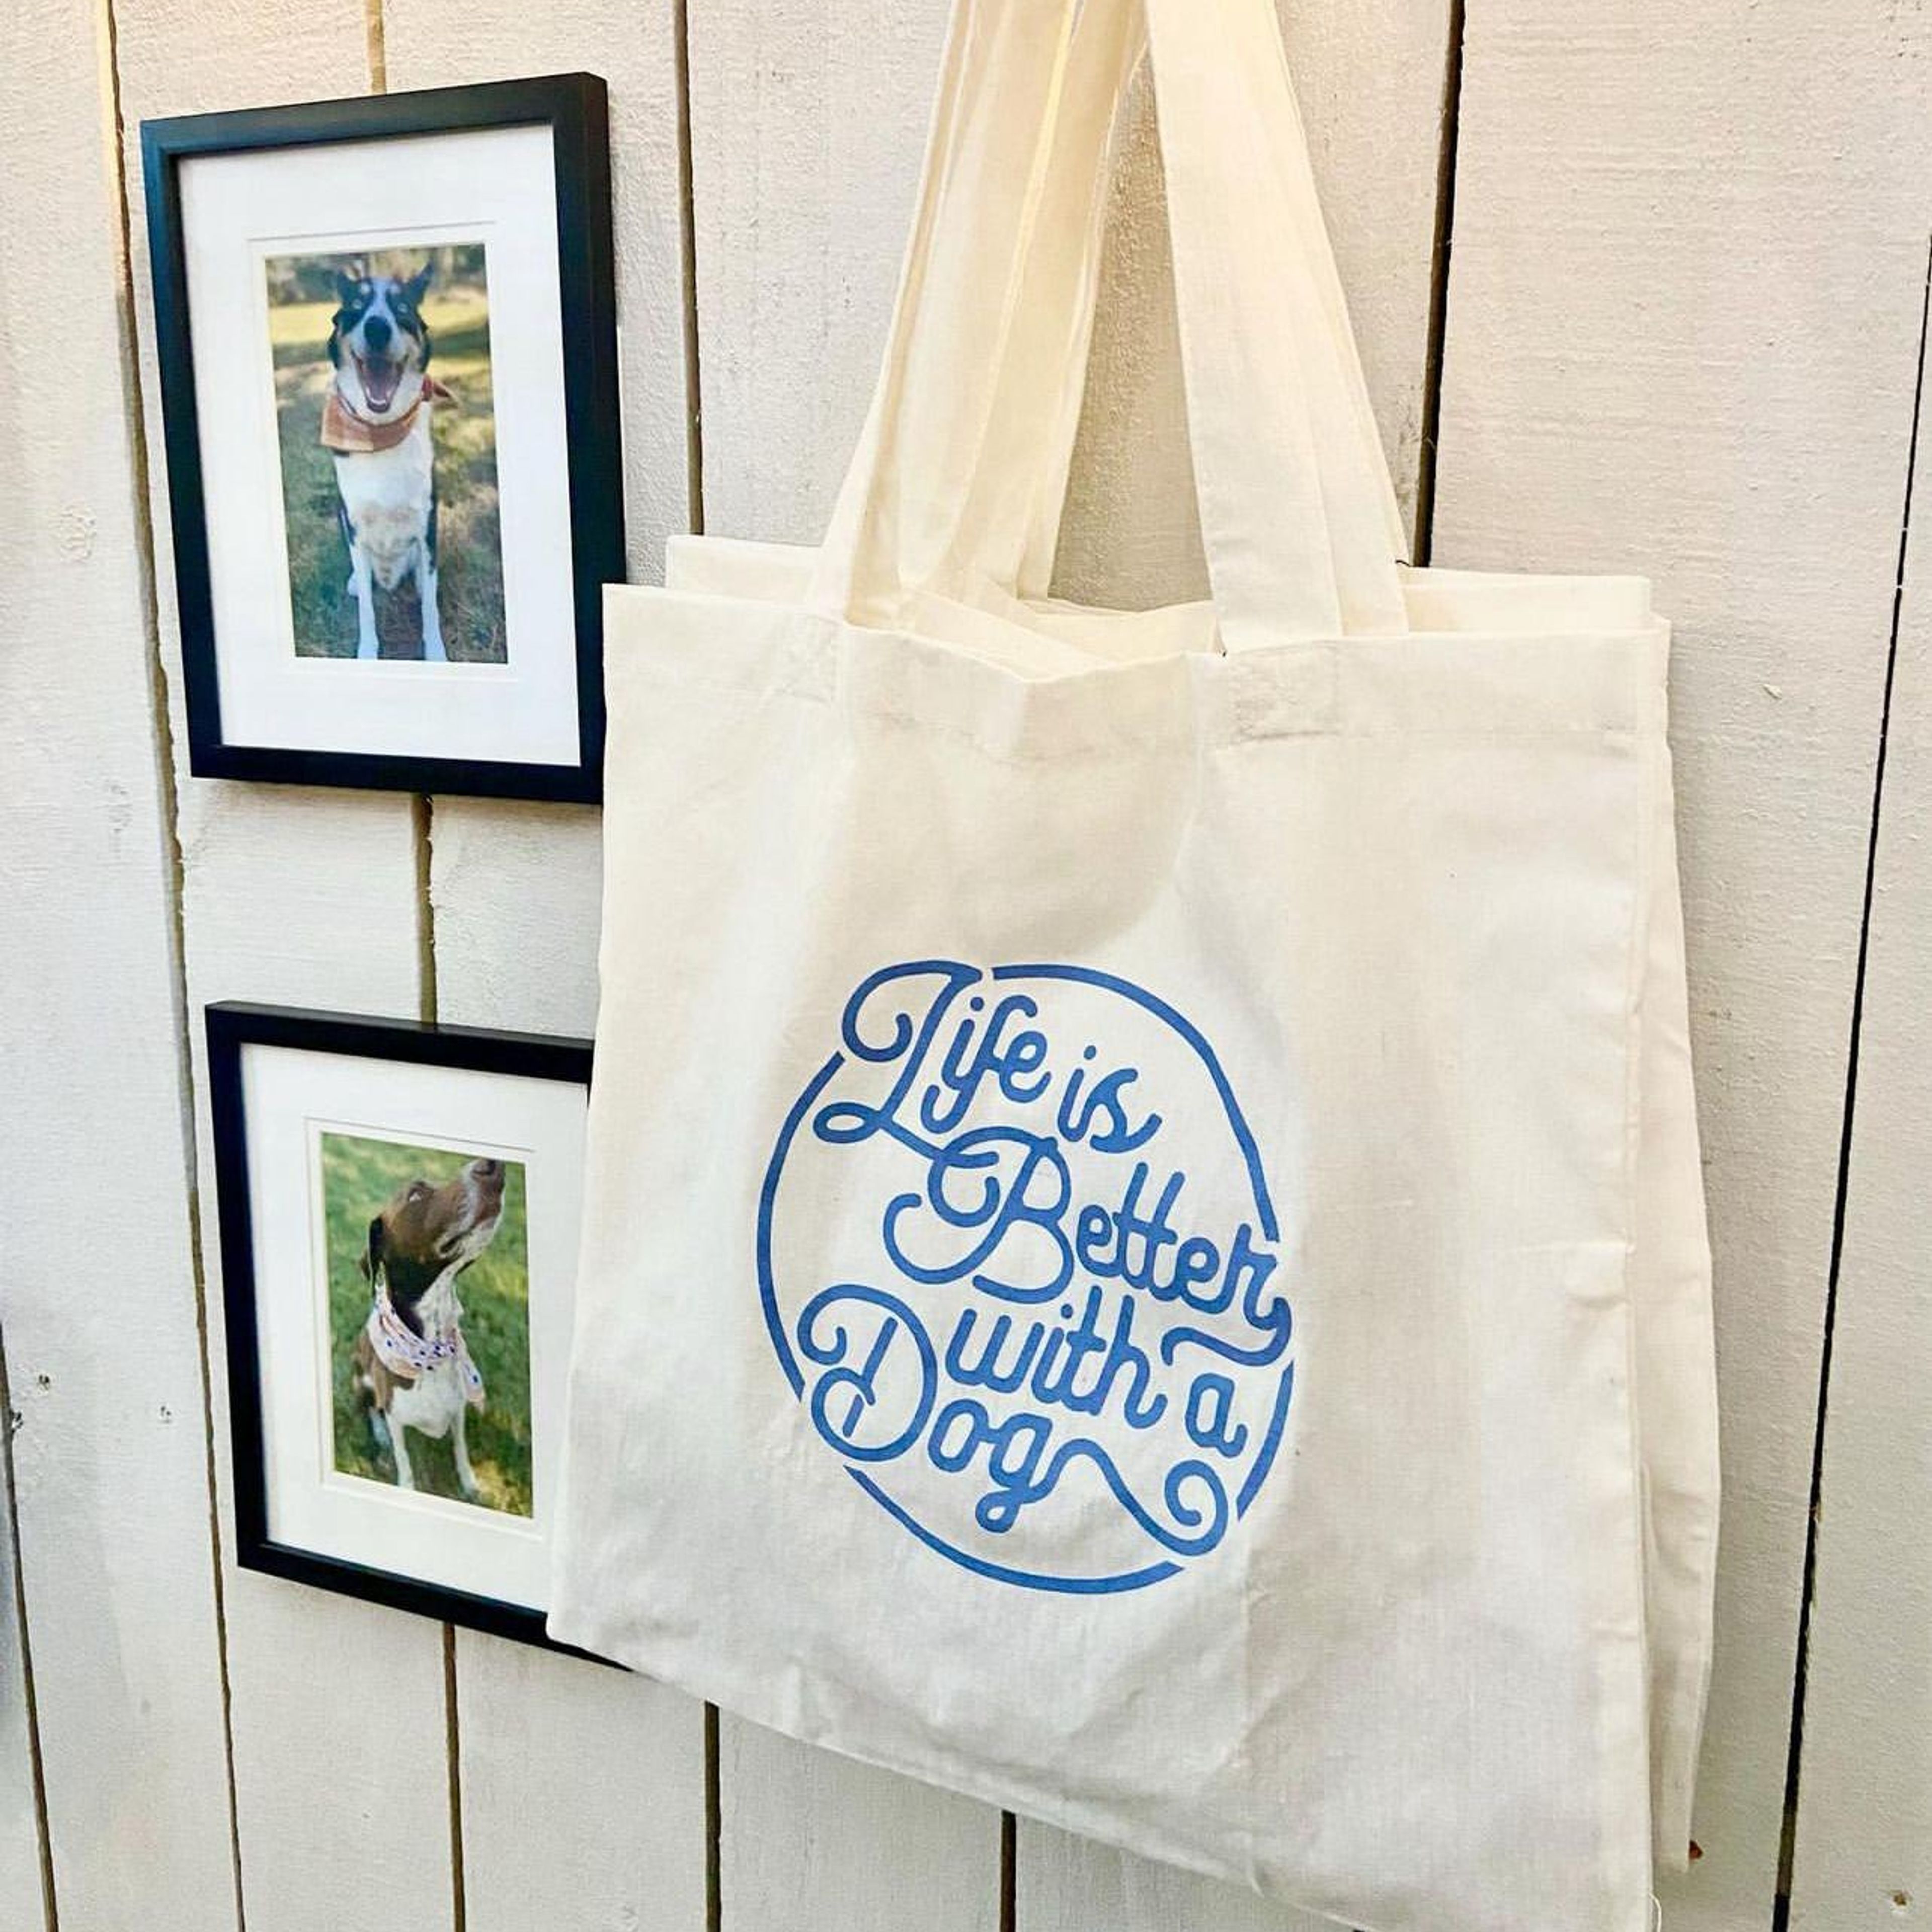 Life is Better with a Dog - Tote